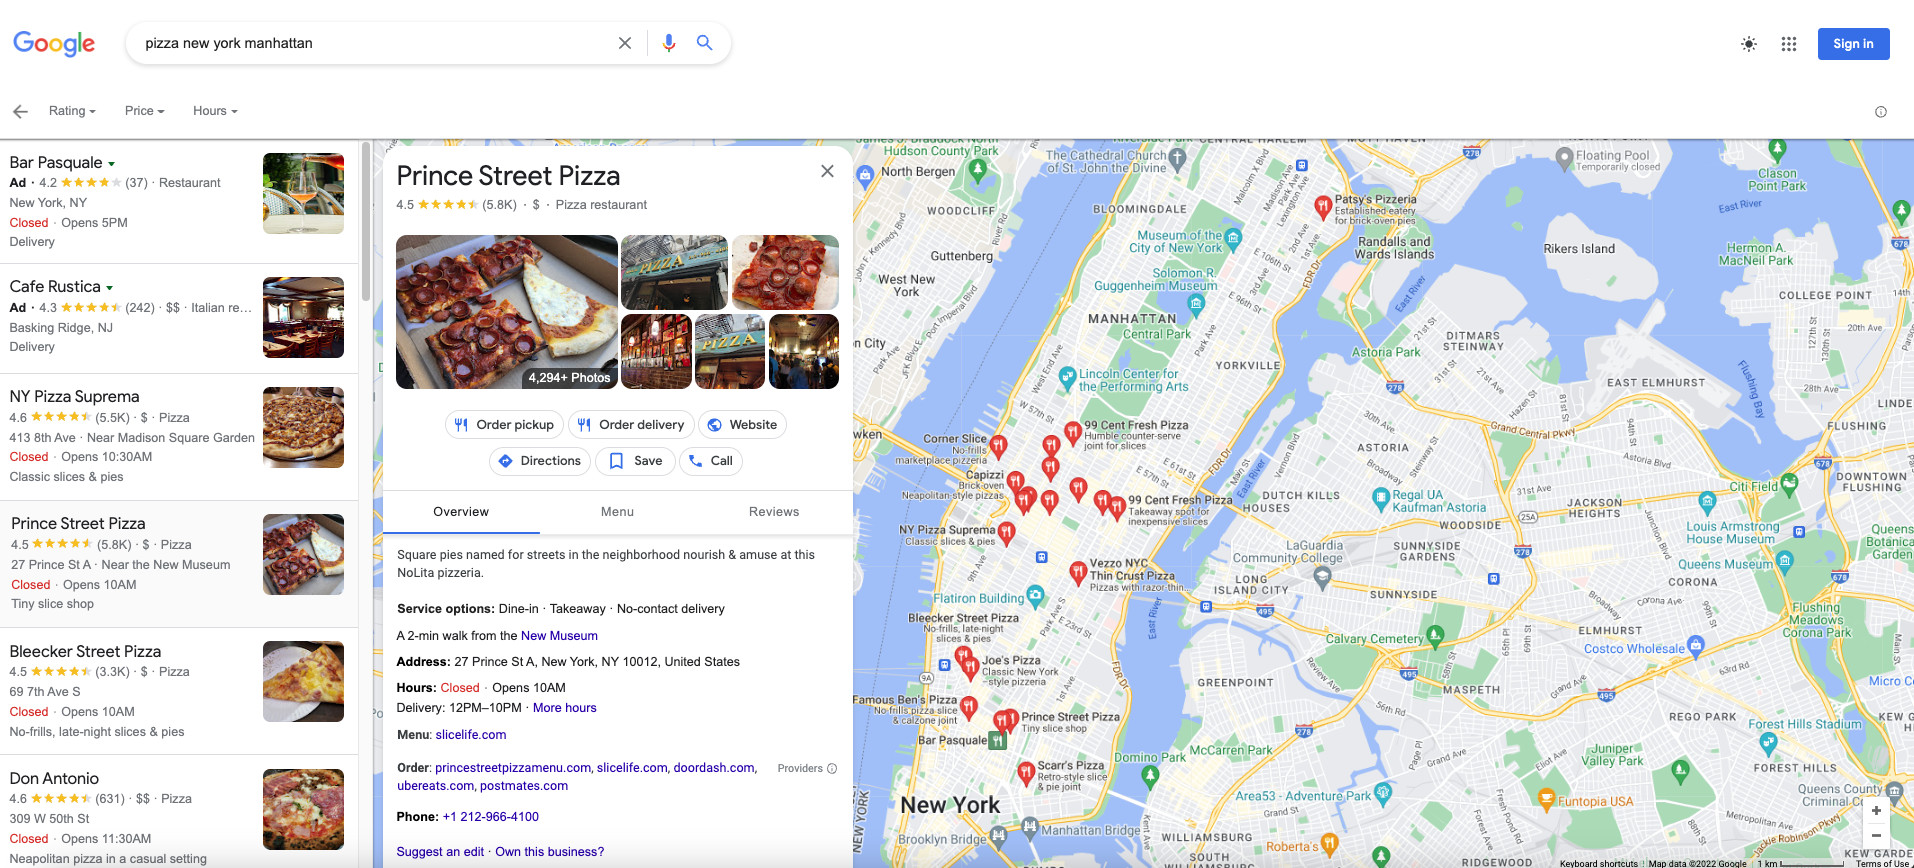 Google Business Profile For Restaurants - Example of well optimized Google profile